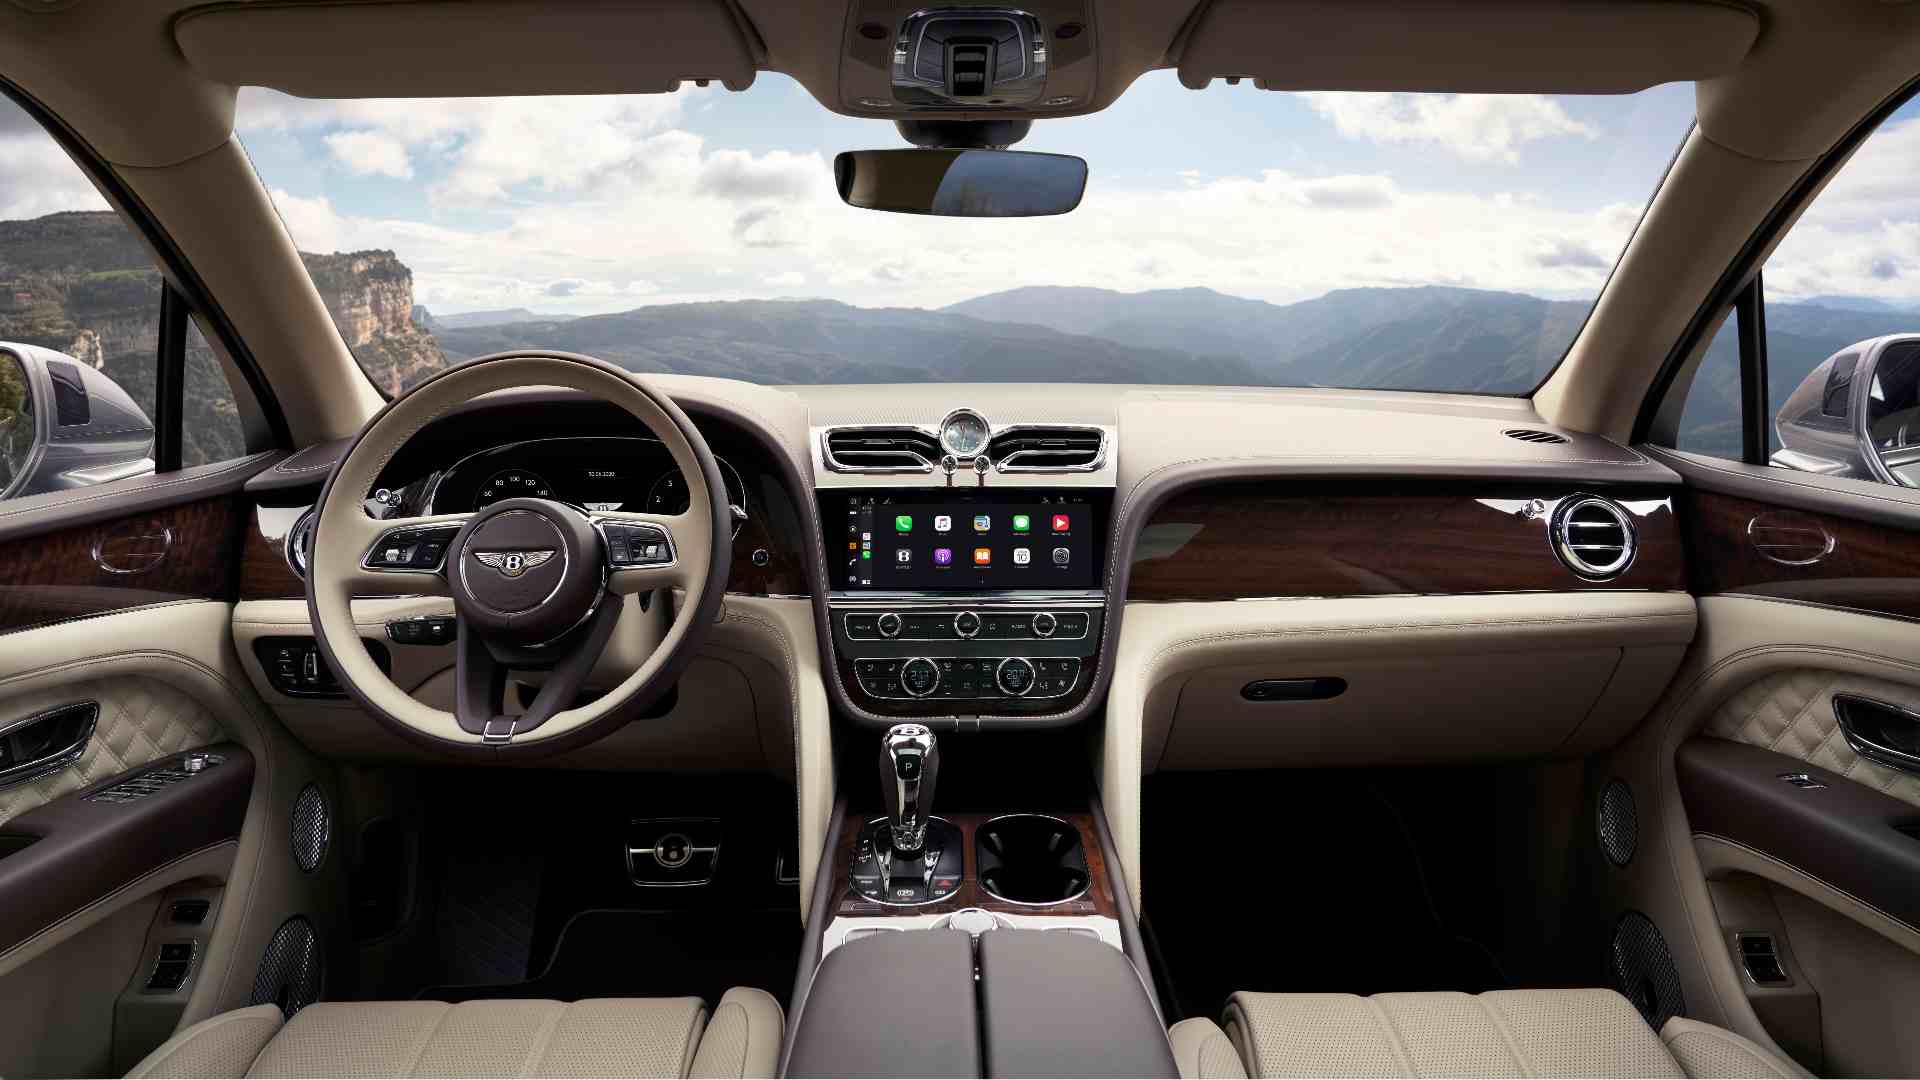 Taking centre stage on the 2021 Bentley Bentayga's dash is a new, 10.9-inch touchscreen infotainment system. Image: Bentley